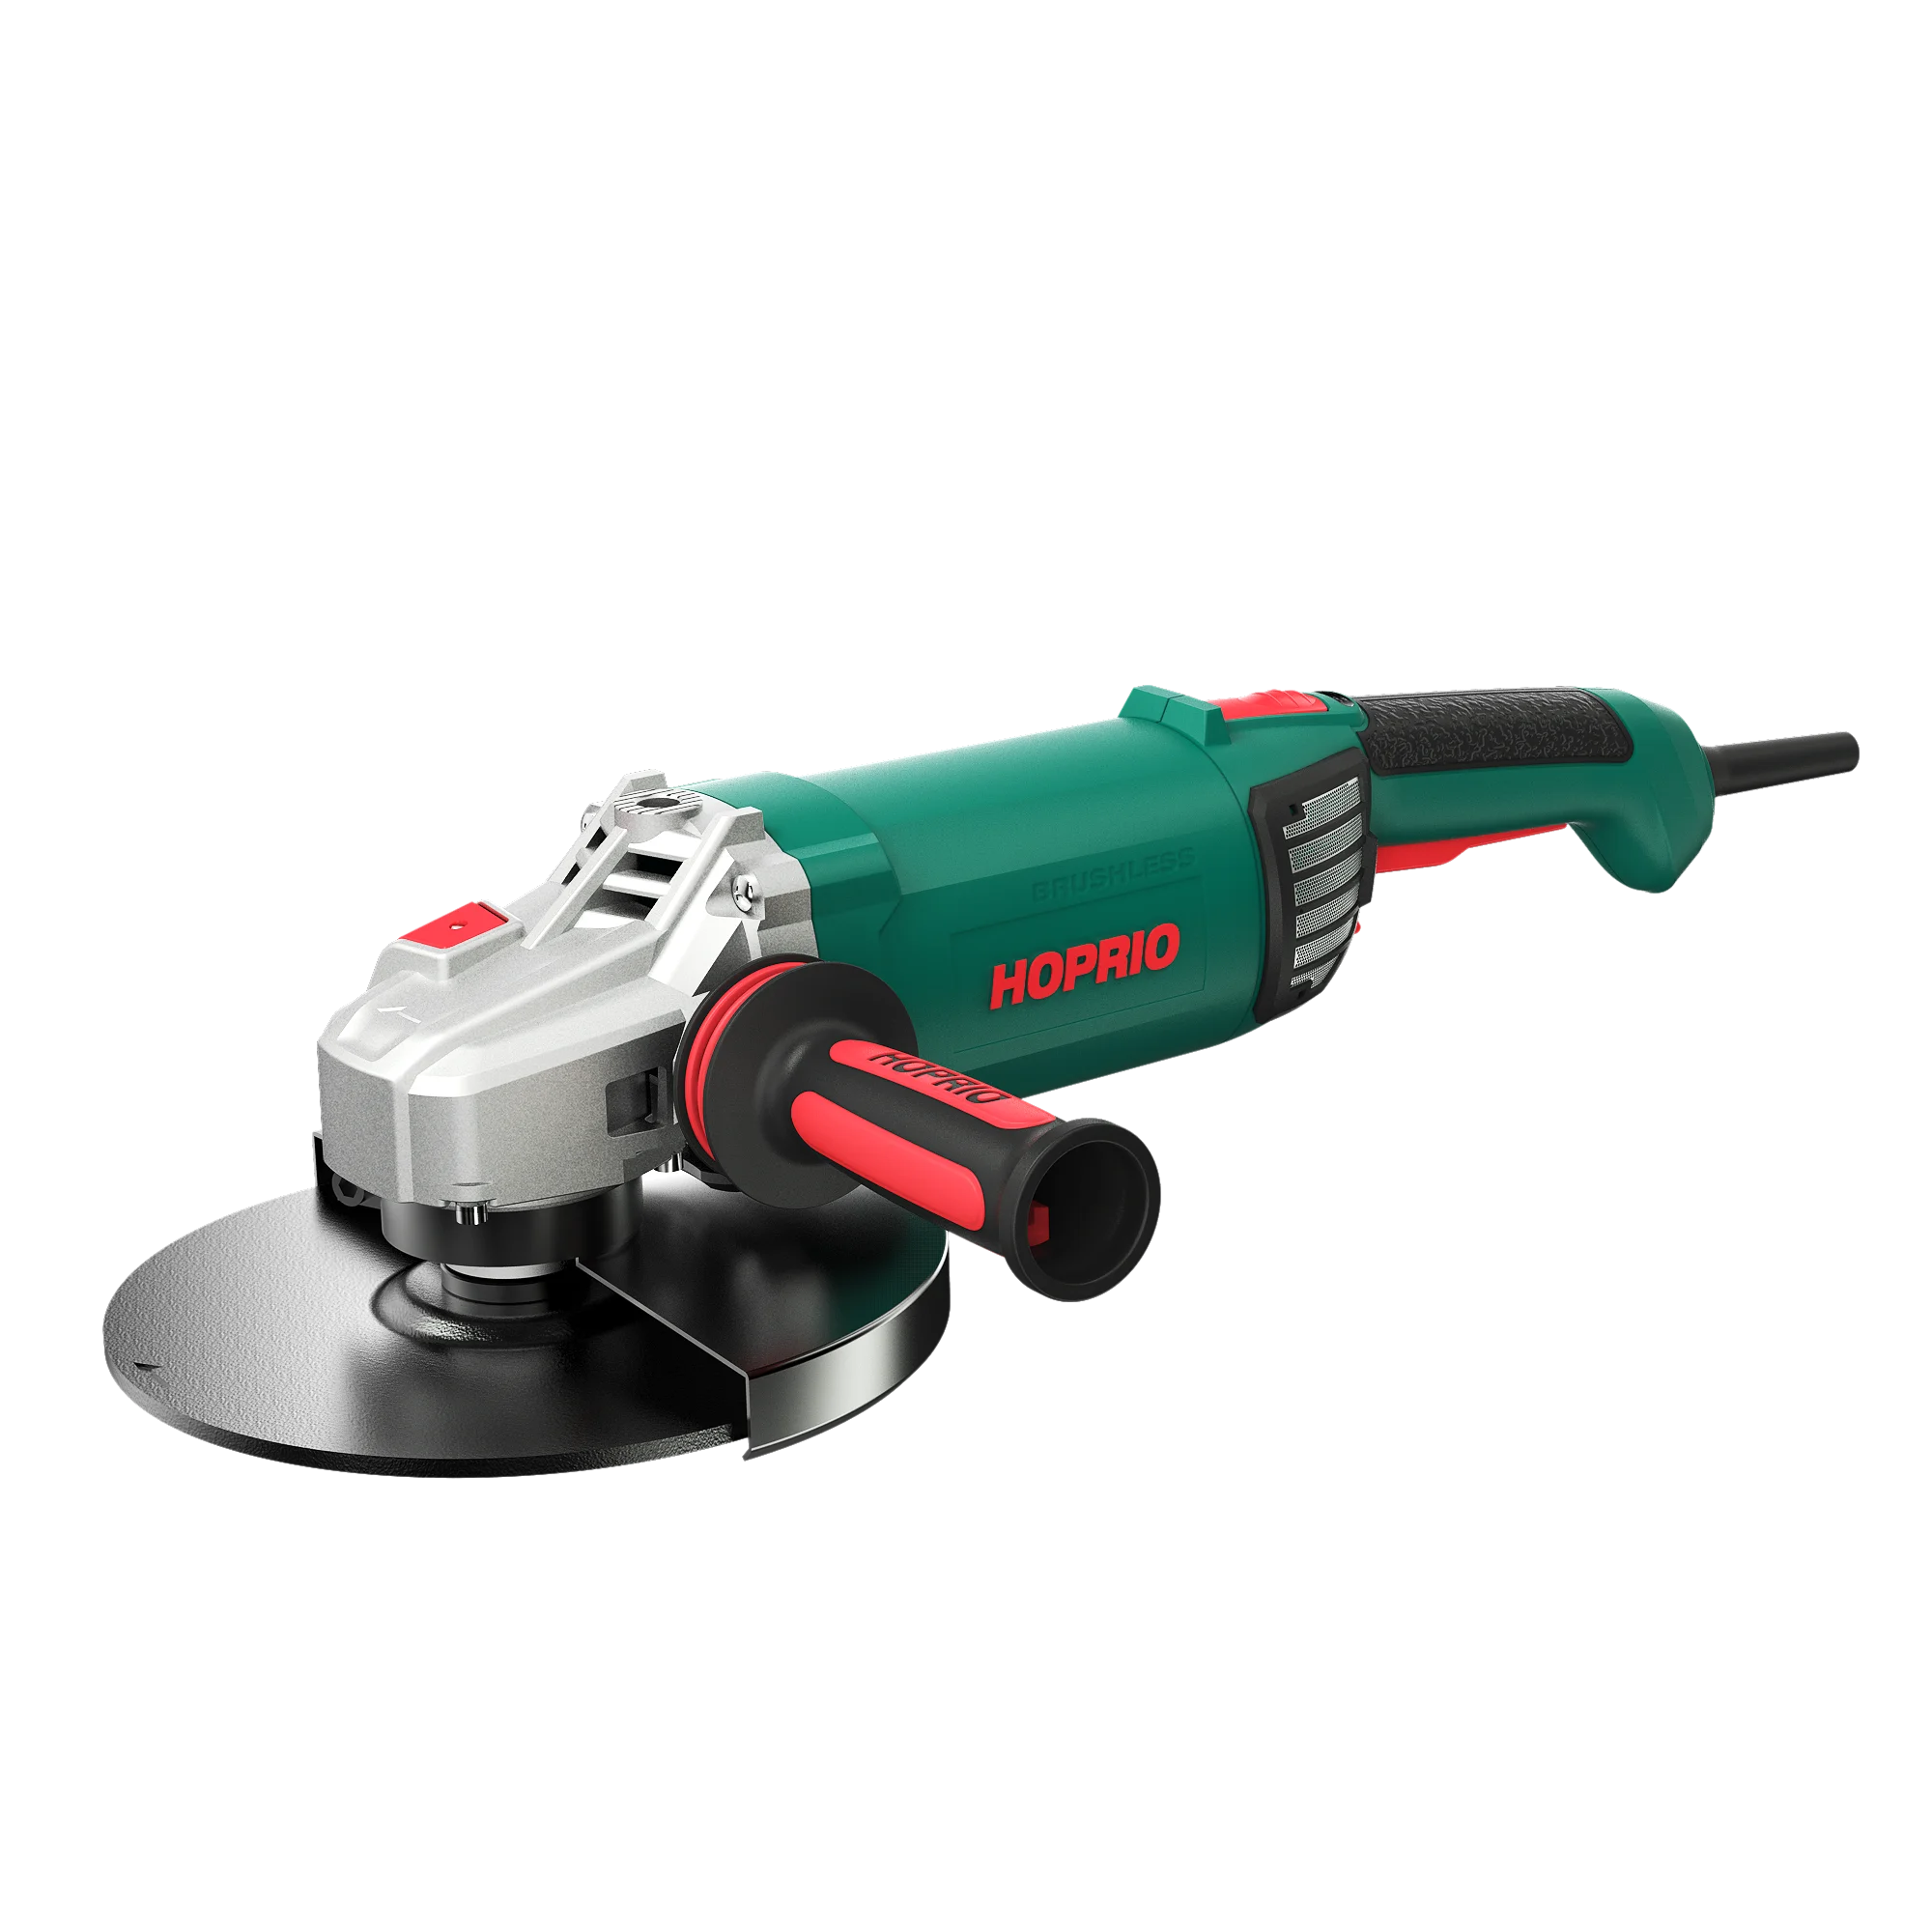 Hoprio essential best 9 inch angle grinder factory price for workshop-5